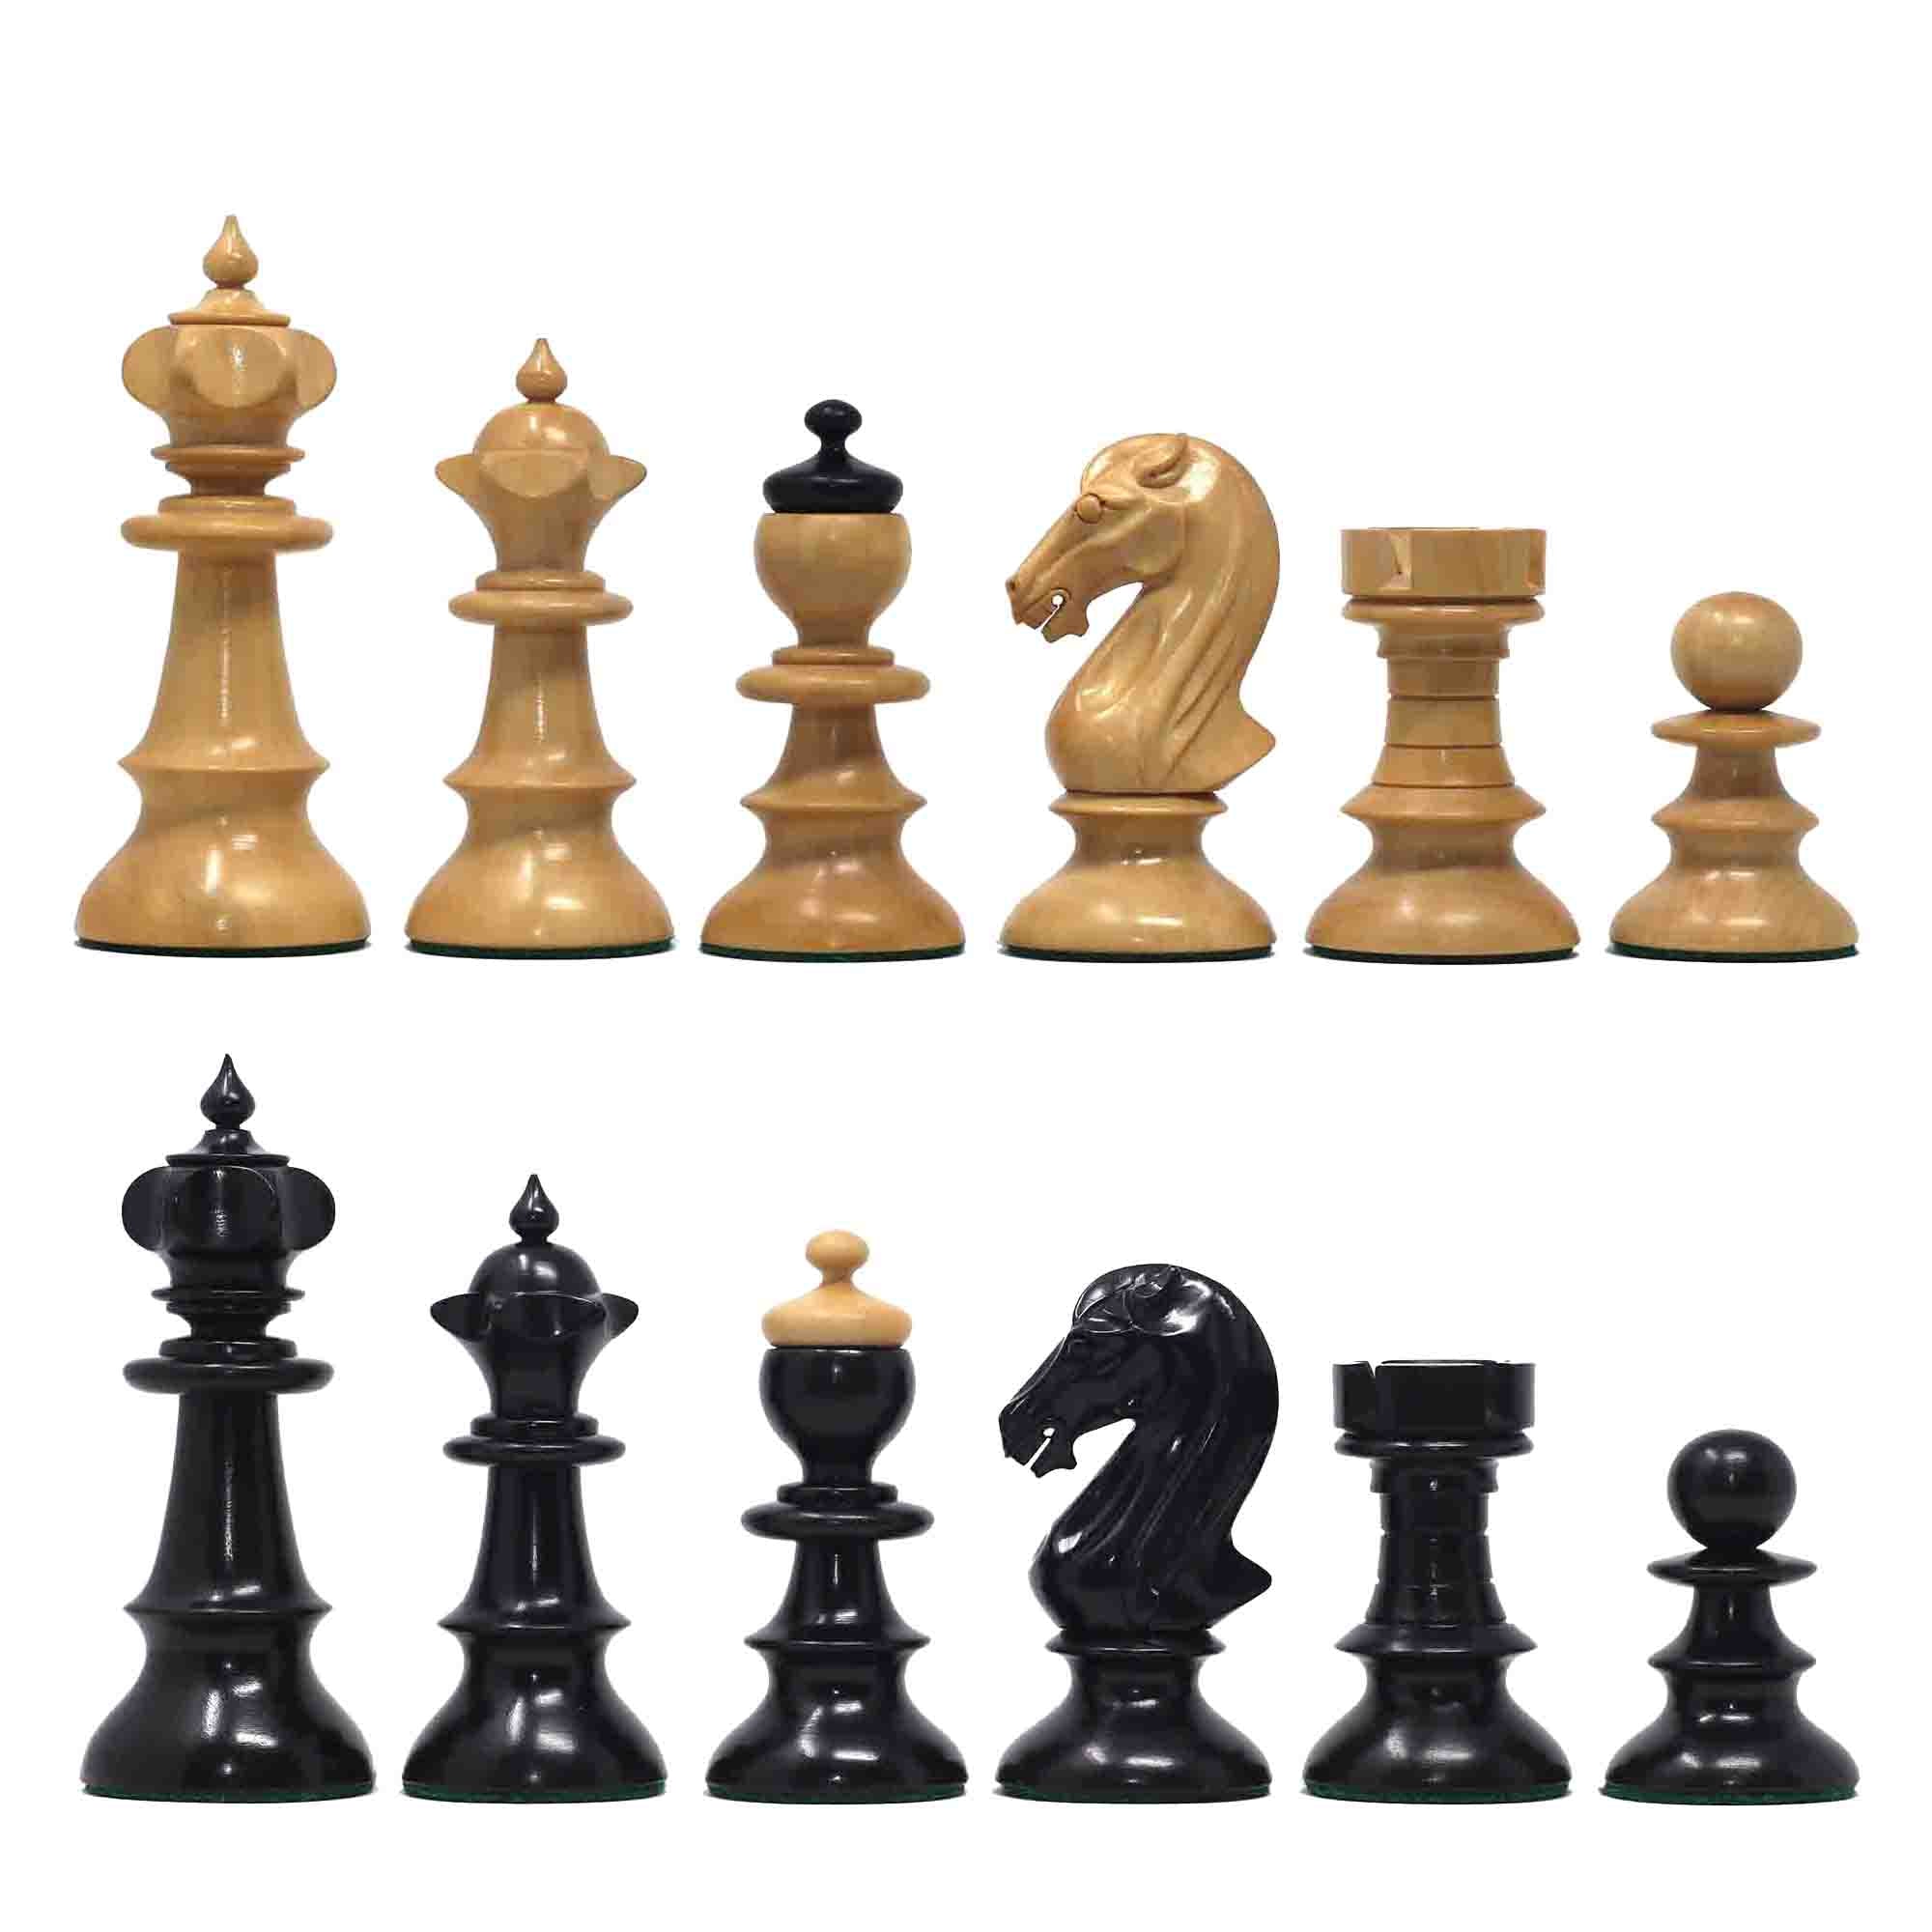 CLEARANCE - The Morphy Series Luxury Chess Pieces - 4.0 King